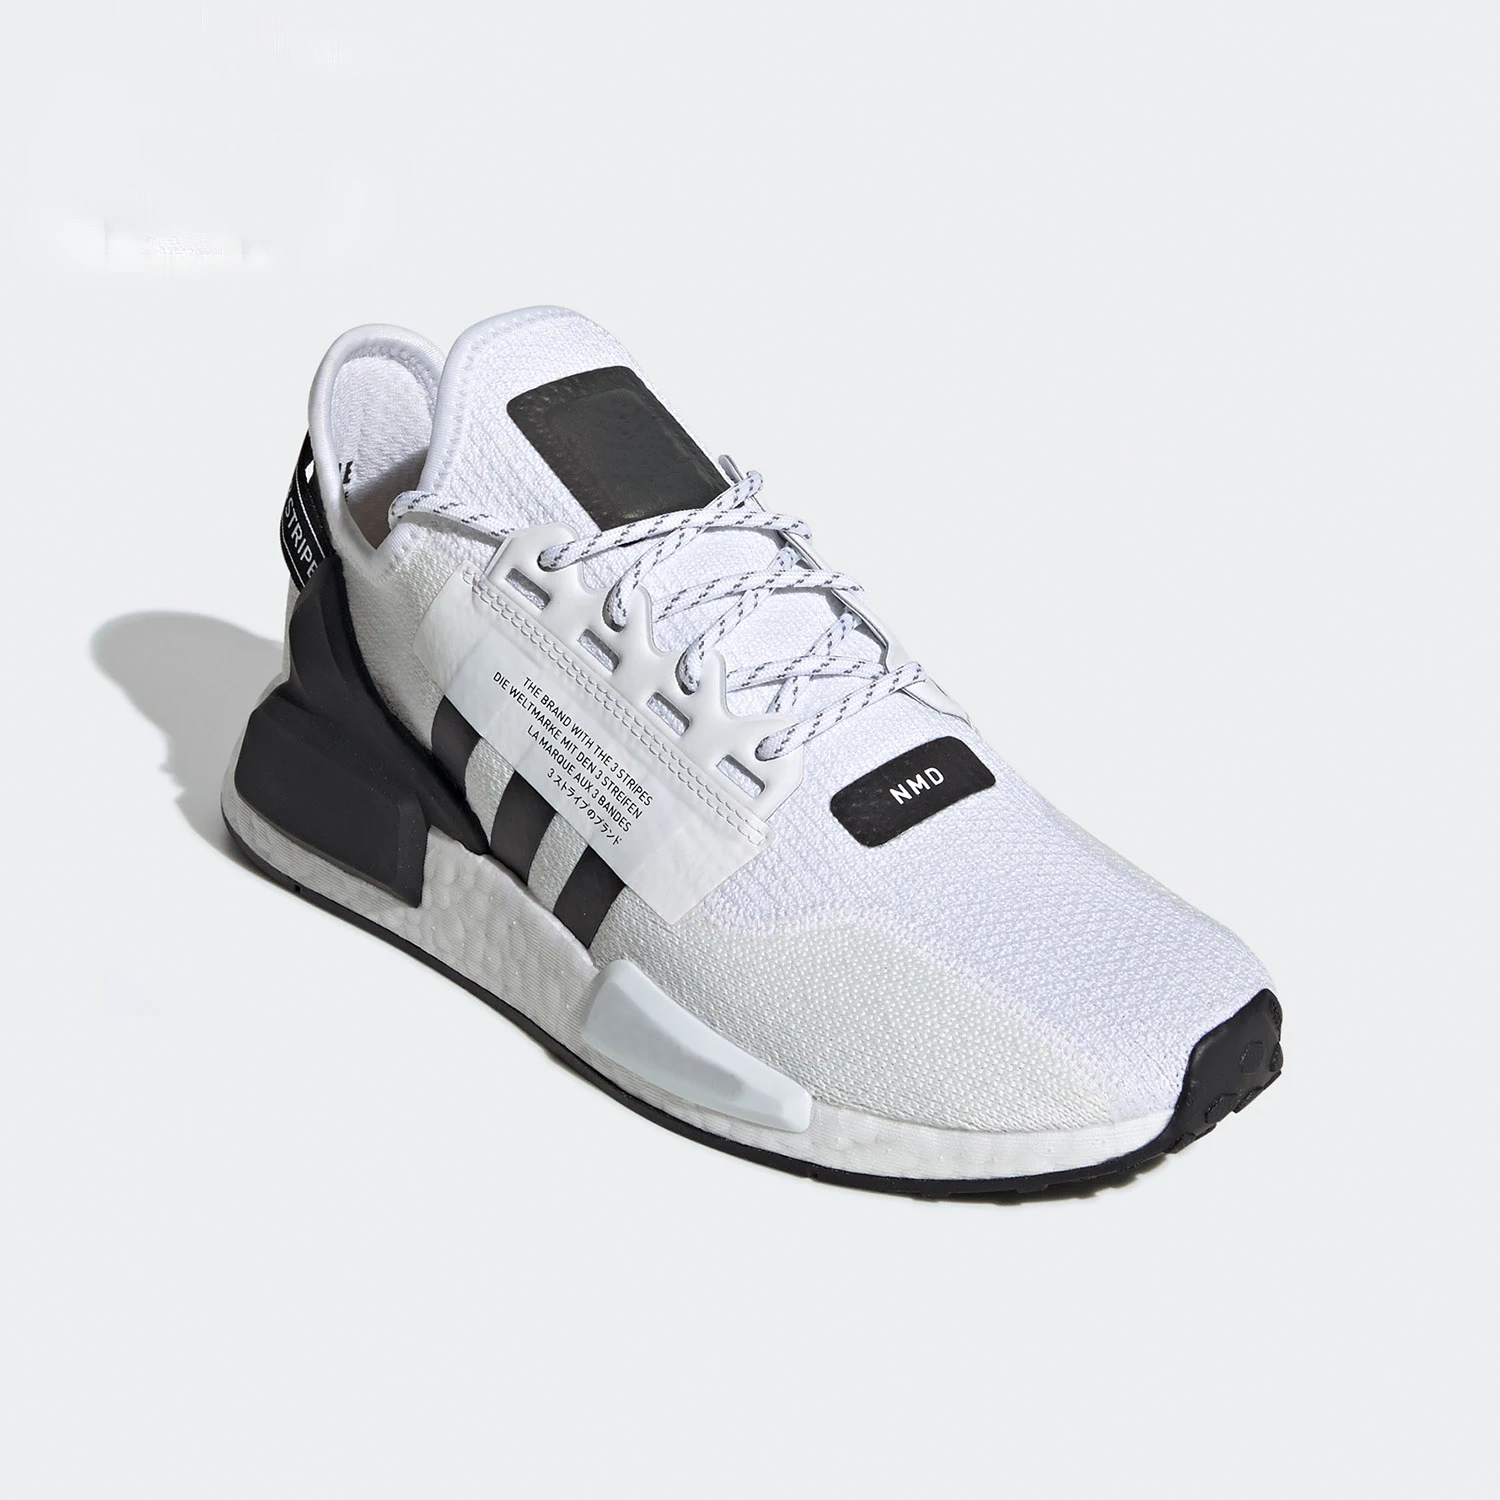 

Top1:1nmd R1 V2 top quality men's and women's classic fashion running shoes sports shoes, Black